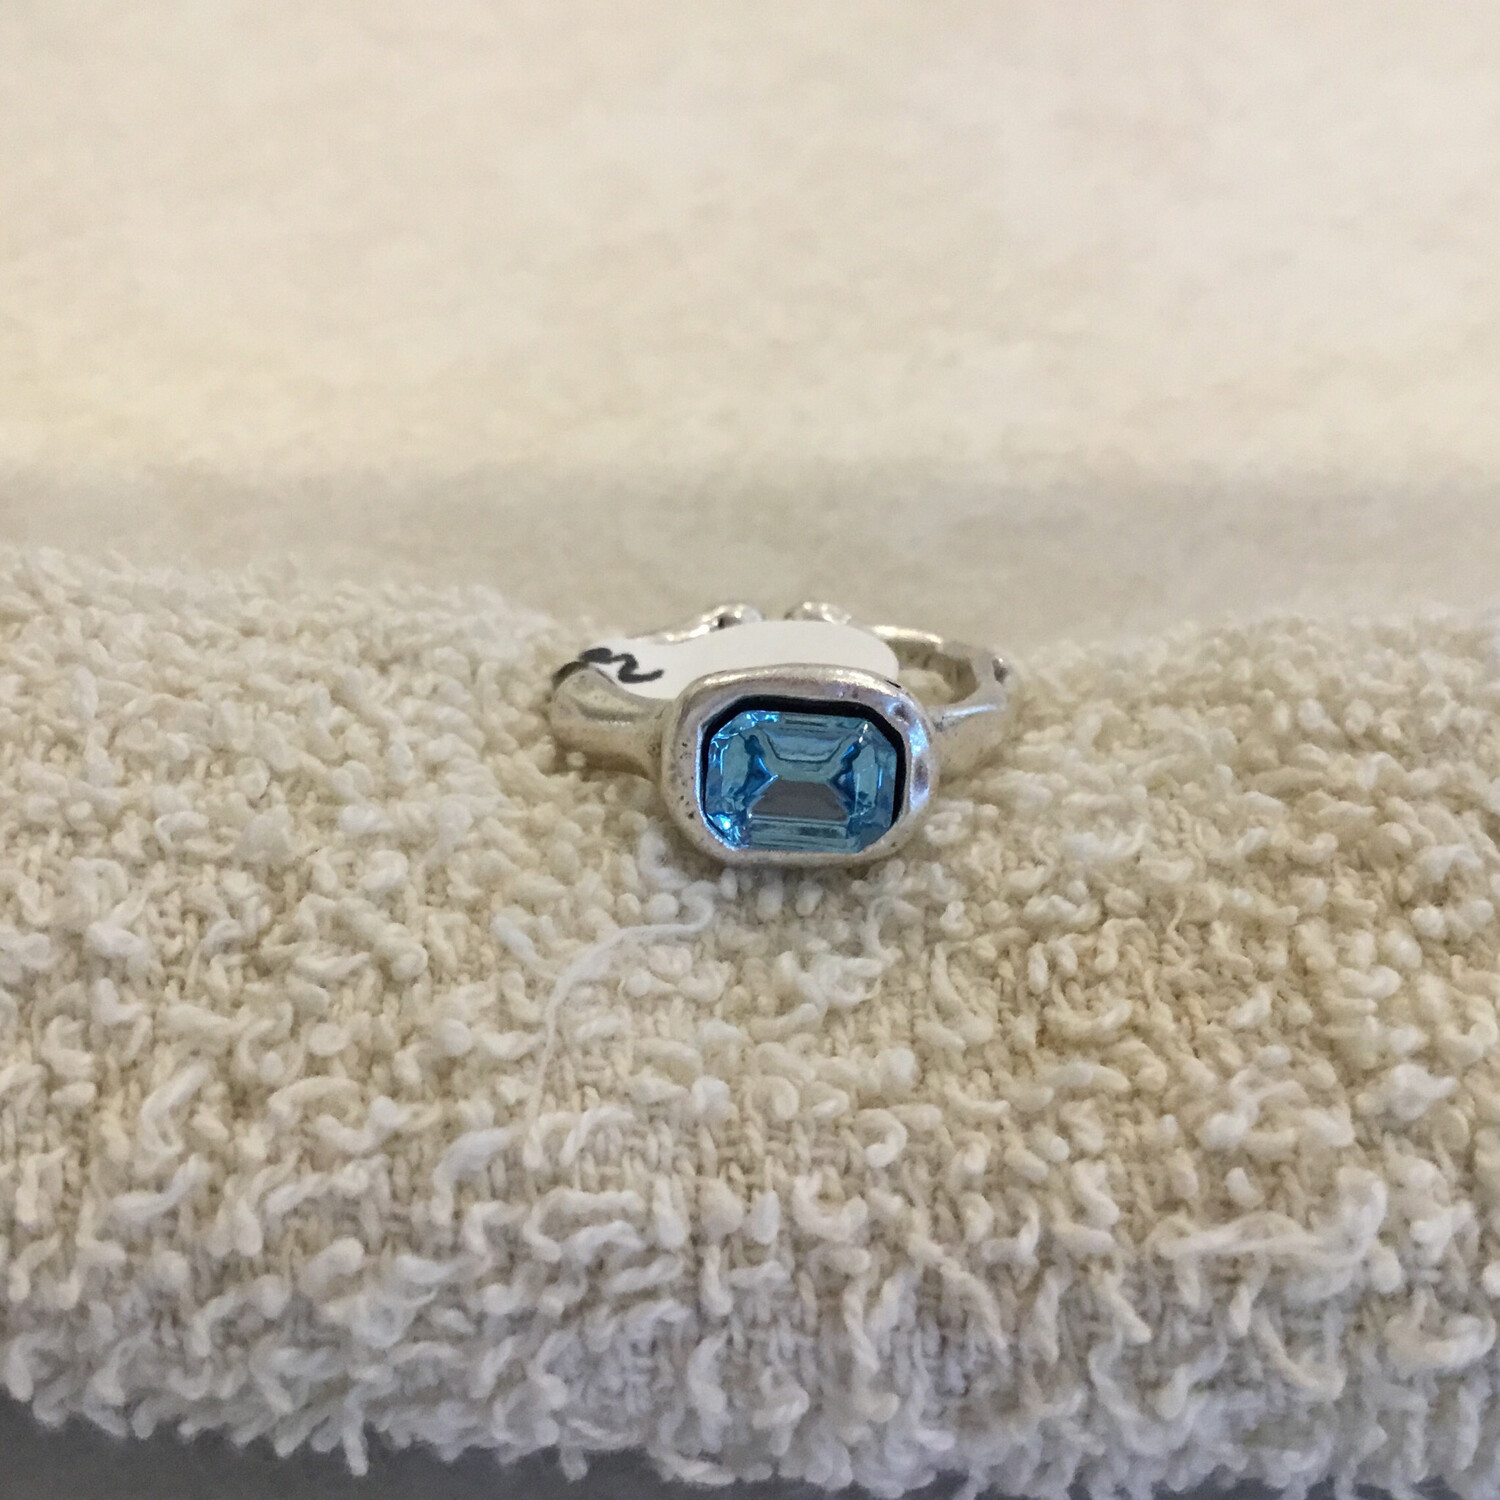 Handmade Pewter Adjustable Ring With Blue Crystal